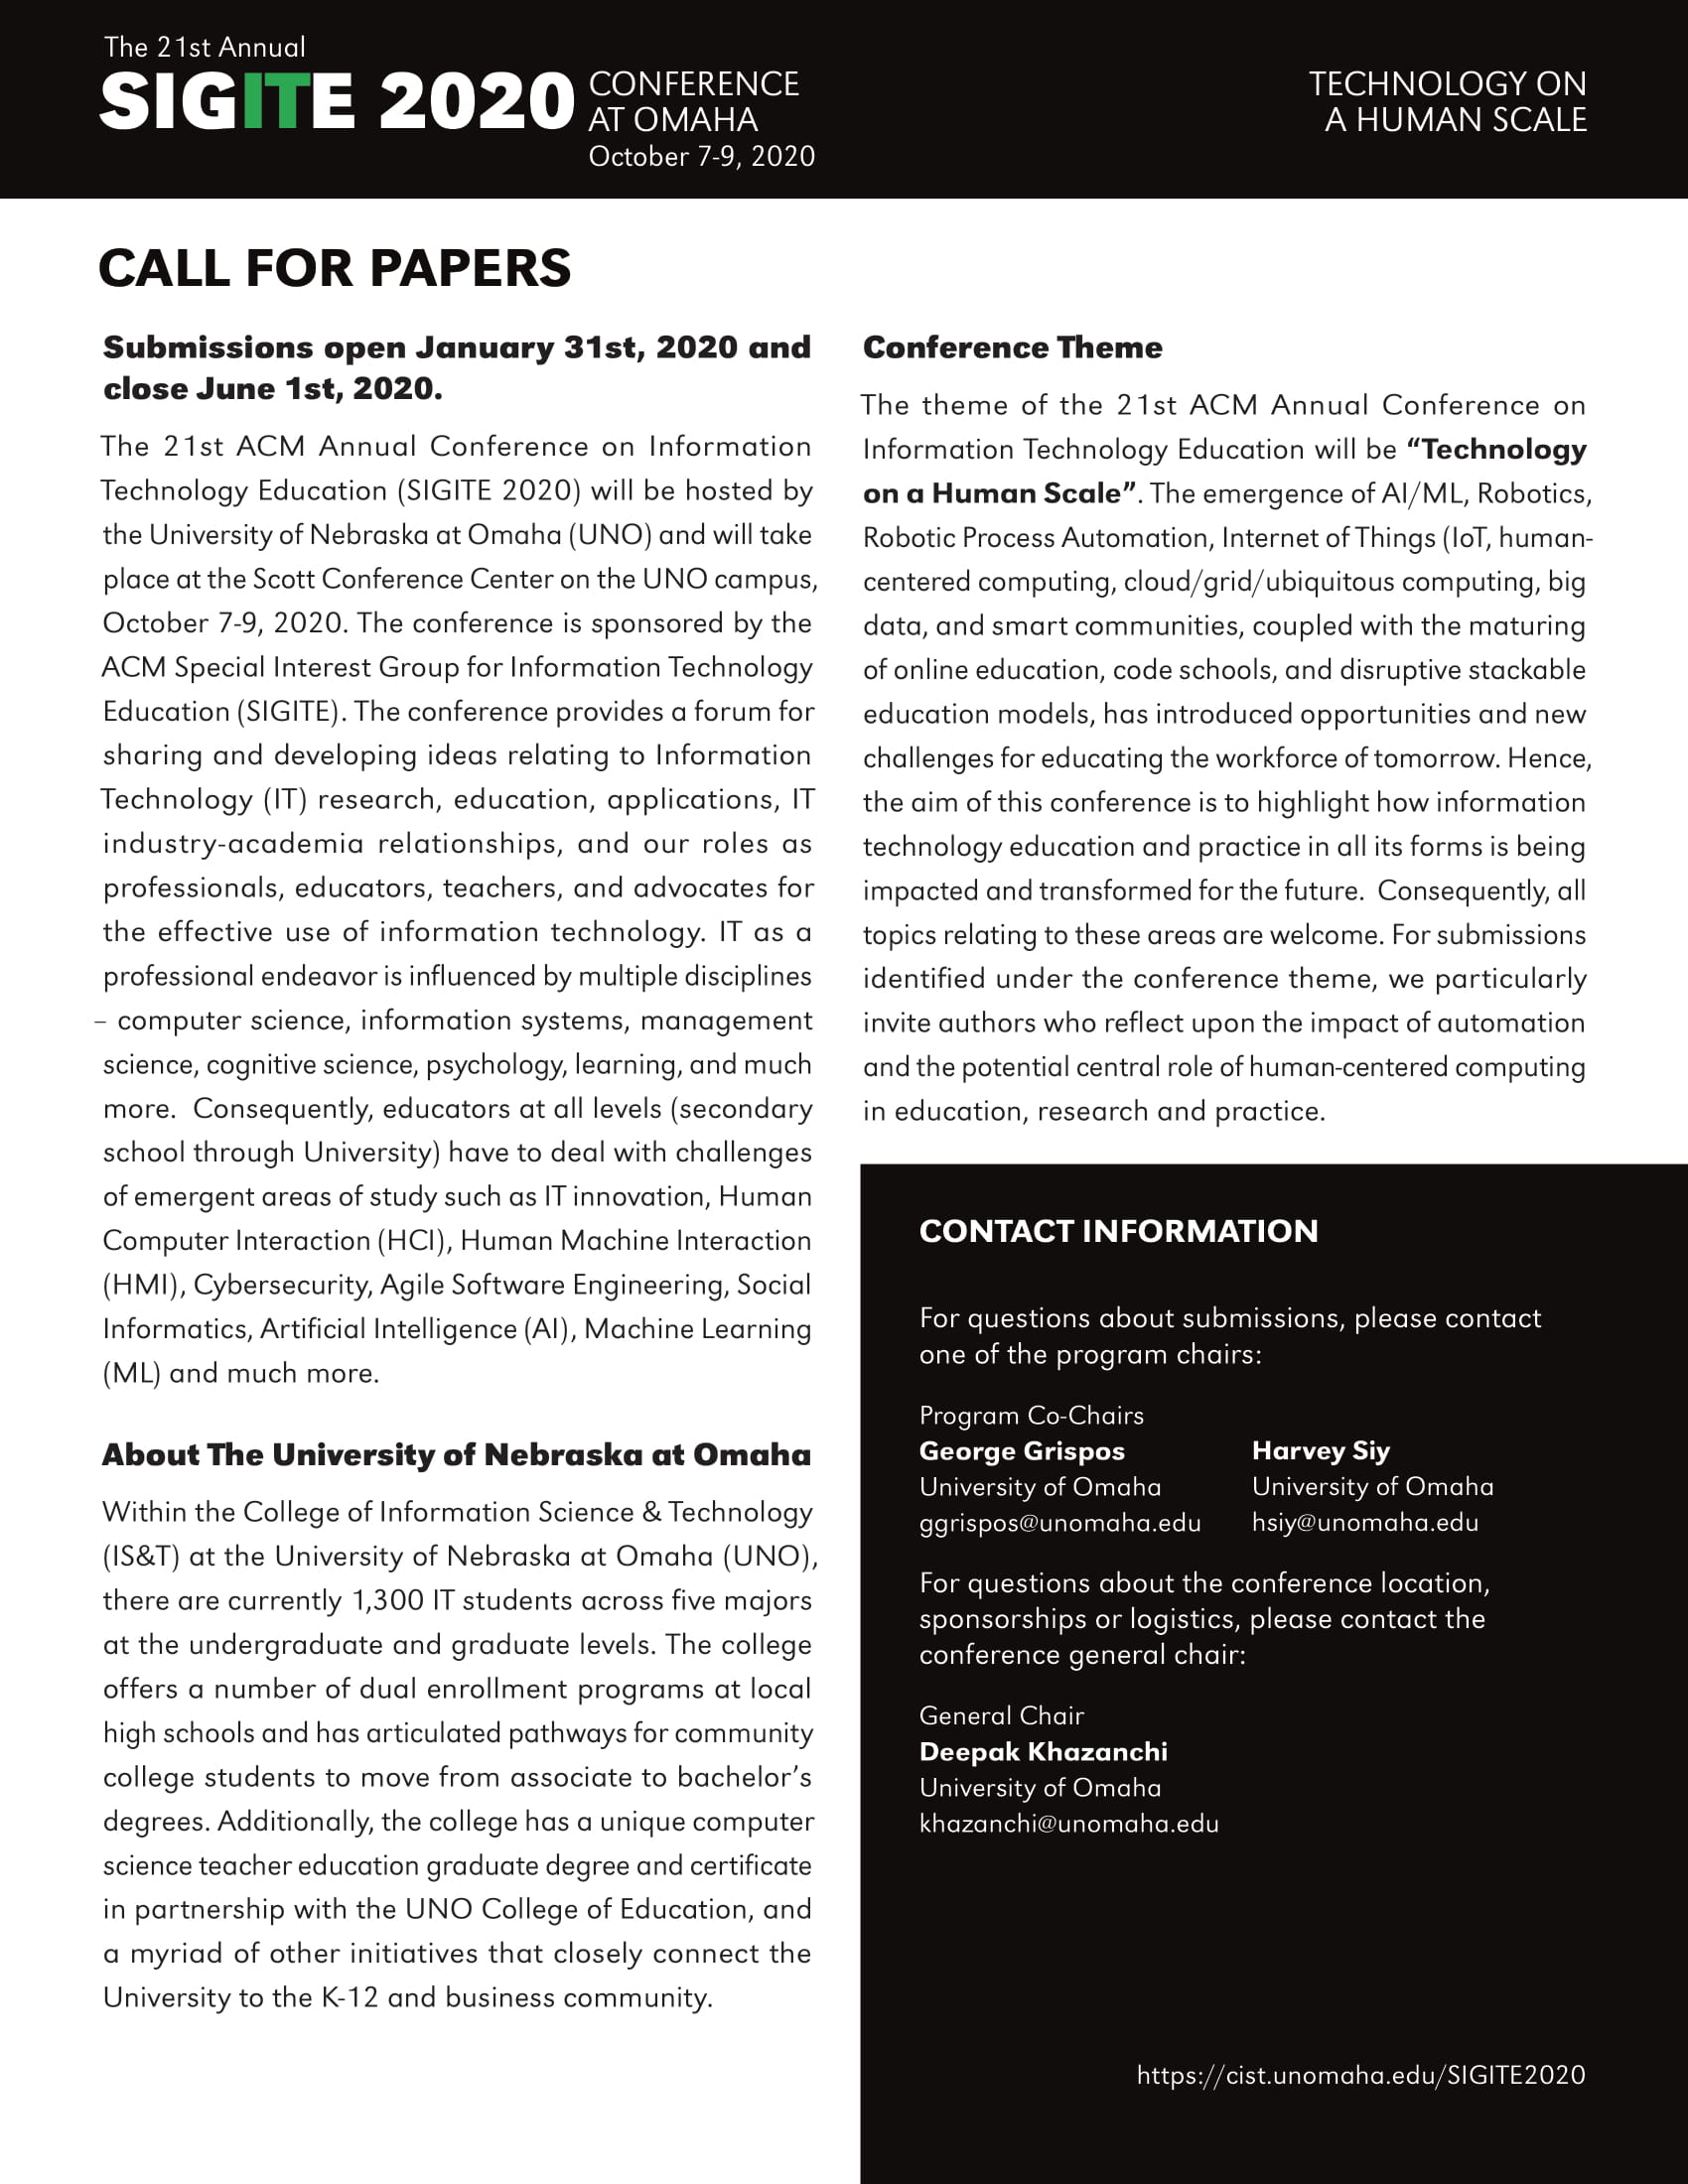 call for papers